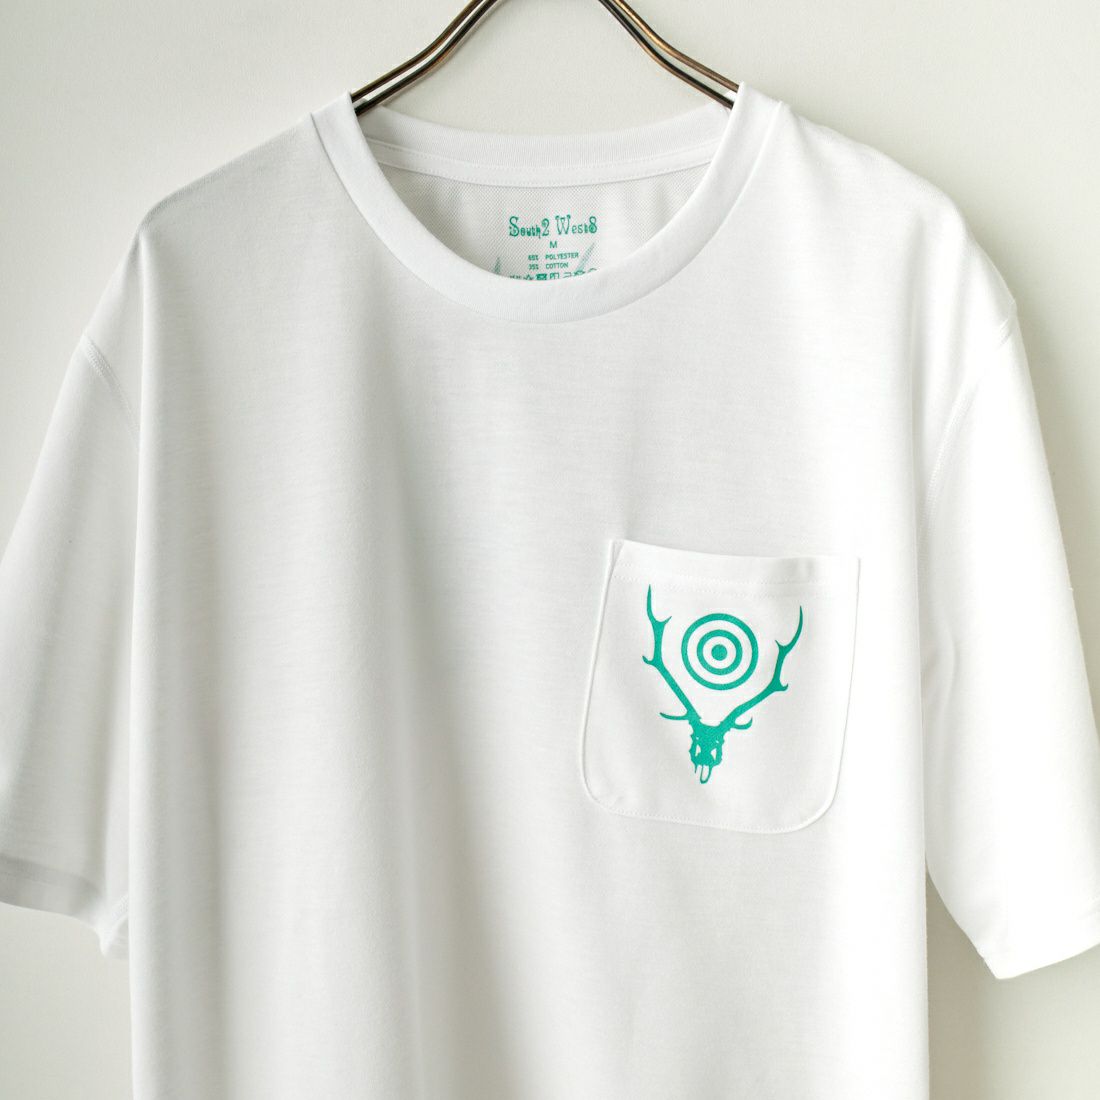 South2West8 [サウスツーウエストエイト] ポケットTシャツ [MR834] A WHITE